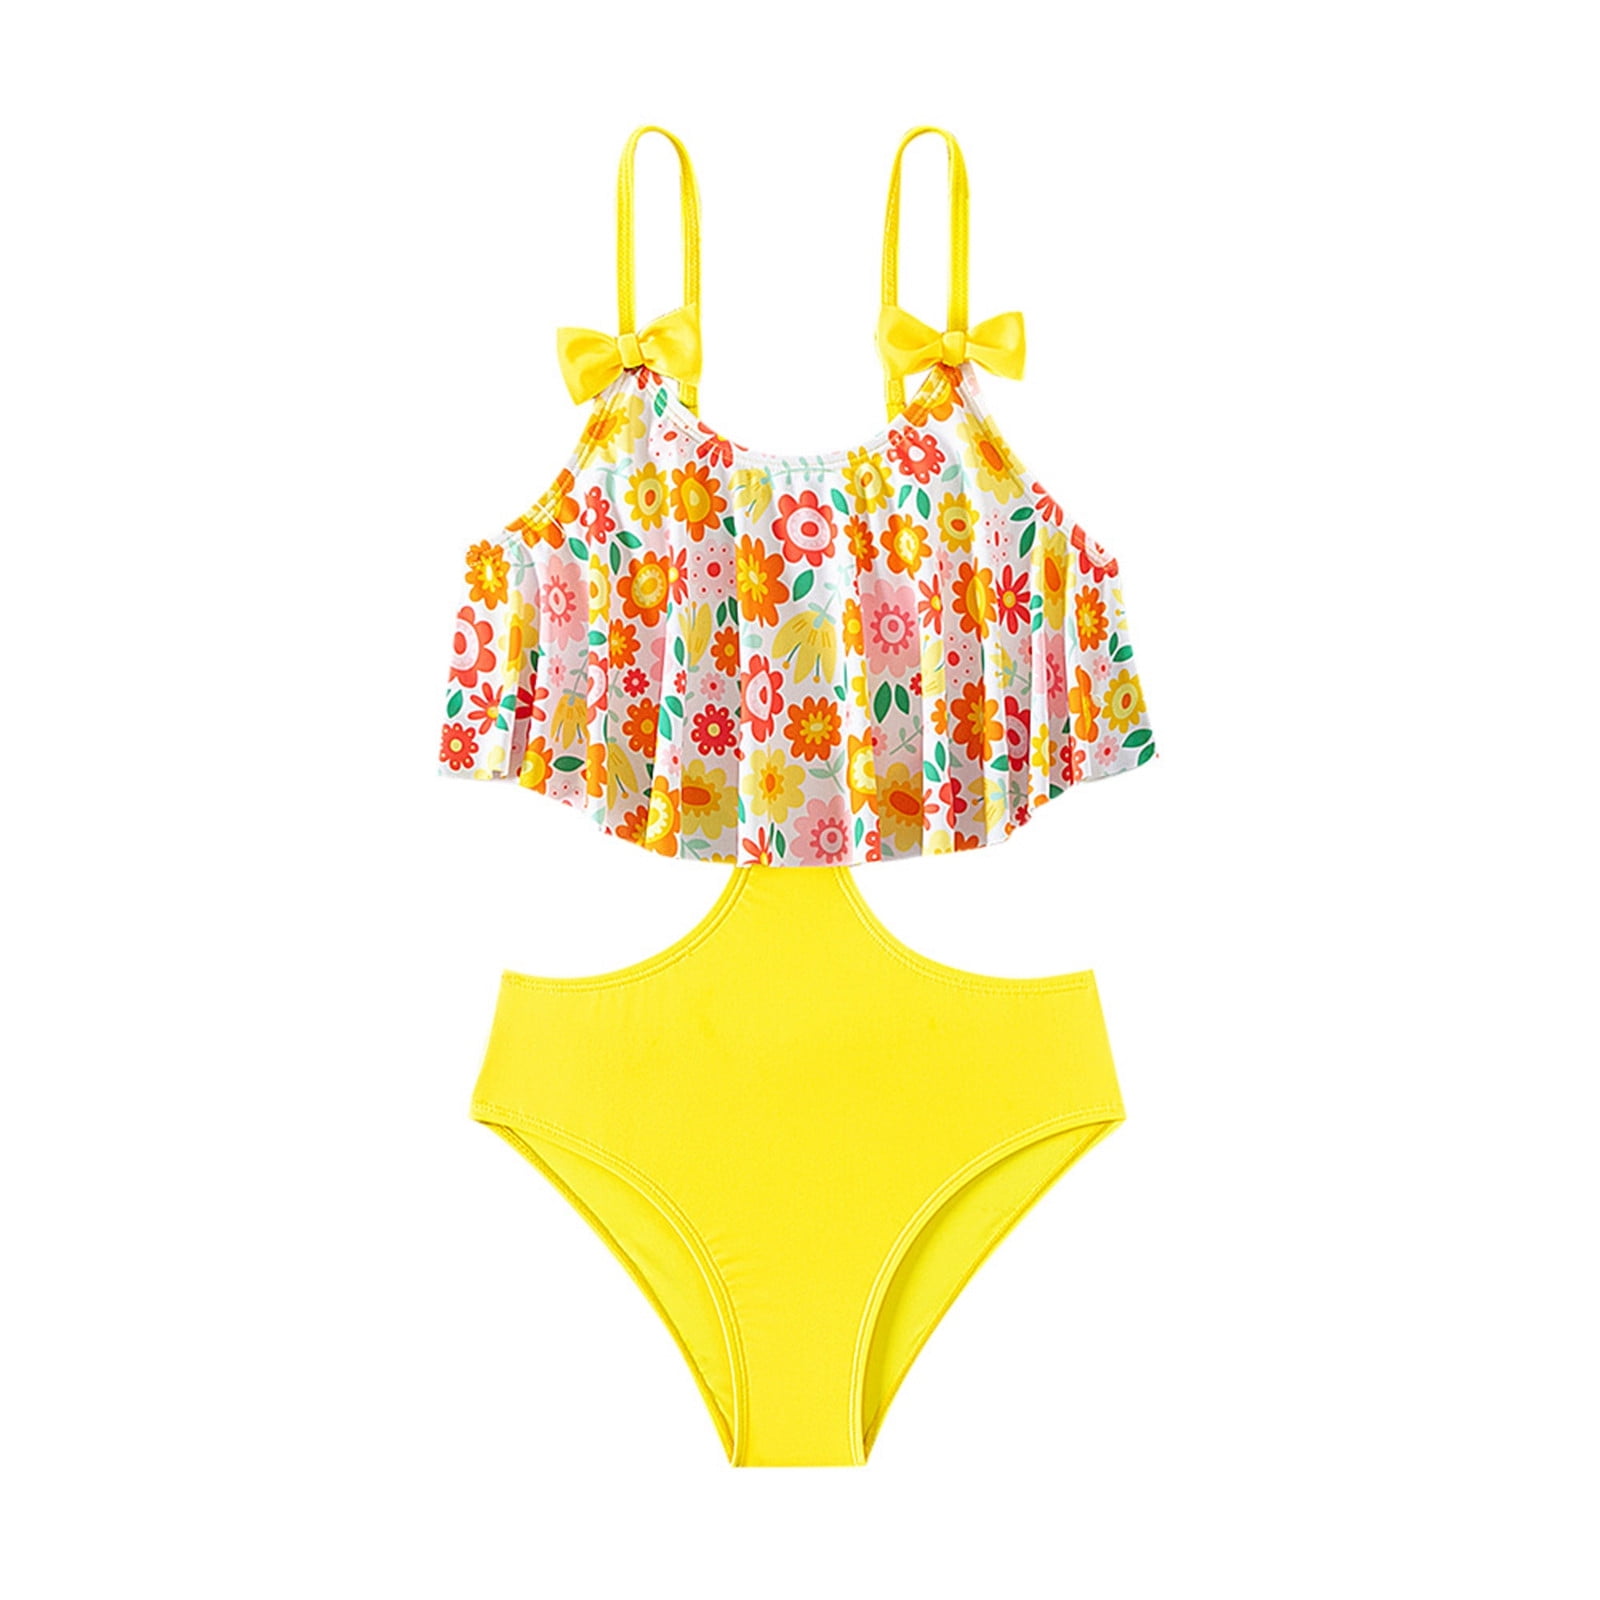 Kids Girls' 1 Pices Swimsuit Beach Bathing Suit For Girls Toddler Cute ...